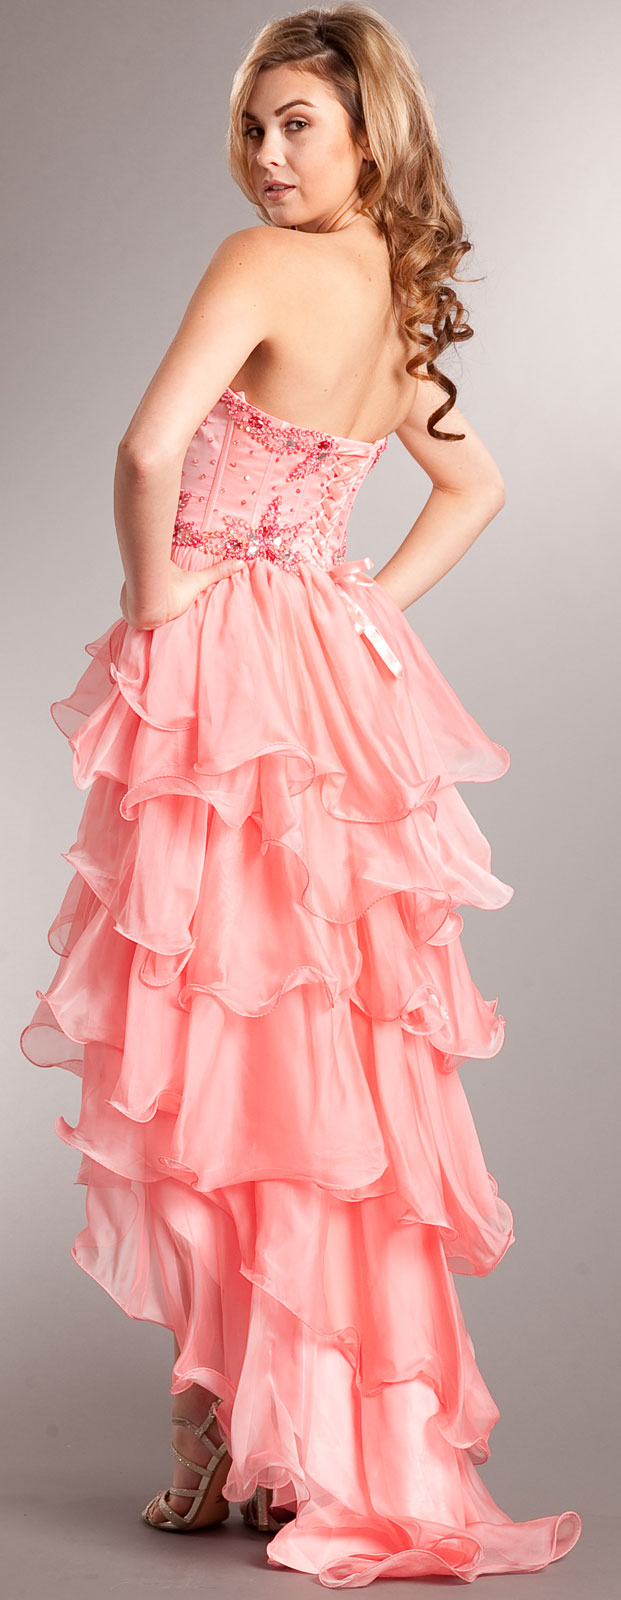 Back image of Strapless High-low Cocktail Prom Dress With Ruffled Skirt